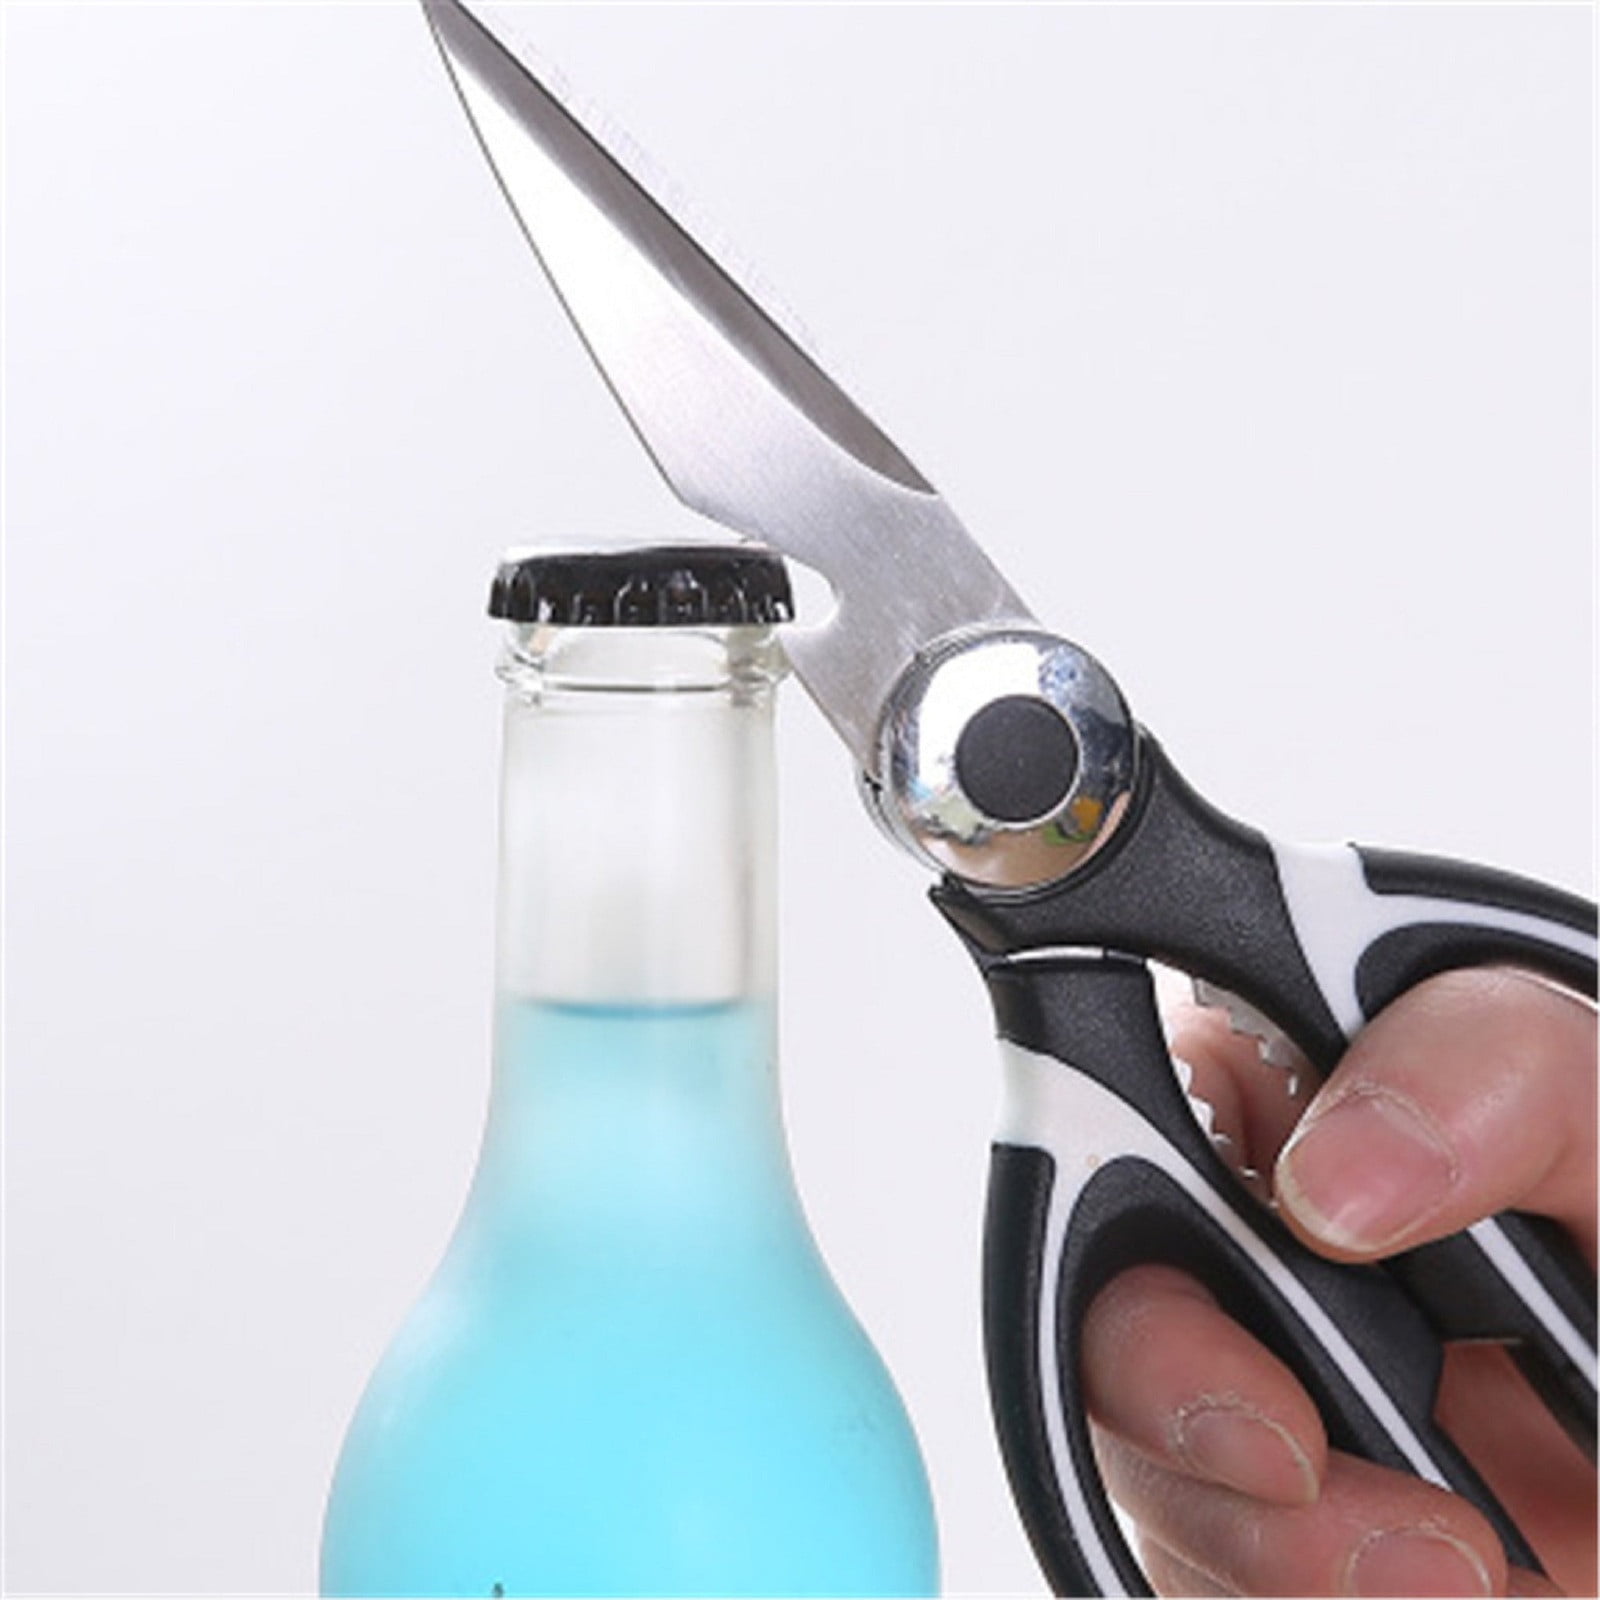  Chicago Cutlery Deluxe Multipurpose Stainless Steel Kitchen  Shears with Built-In Bottle Opener, For Left and Right Handed Users,  Resists Rust, Stains, and Pitting, Kitchen Scissors: Cutlery Sissors: Home  & Kitchen